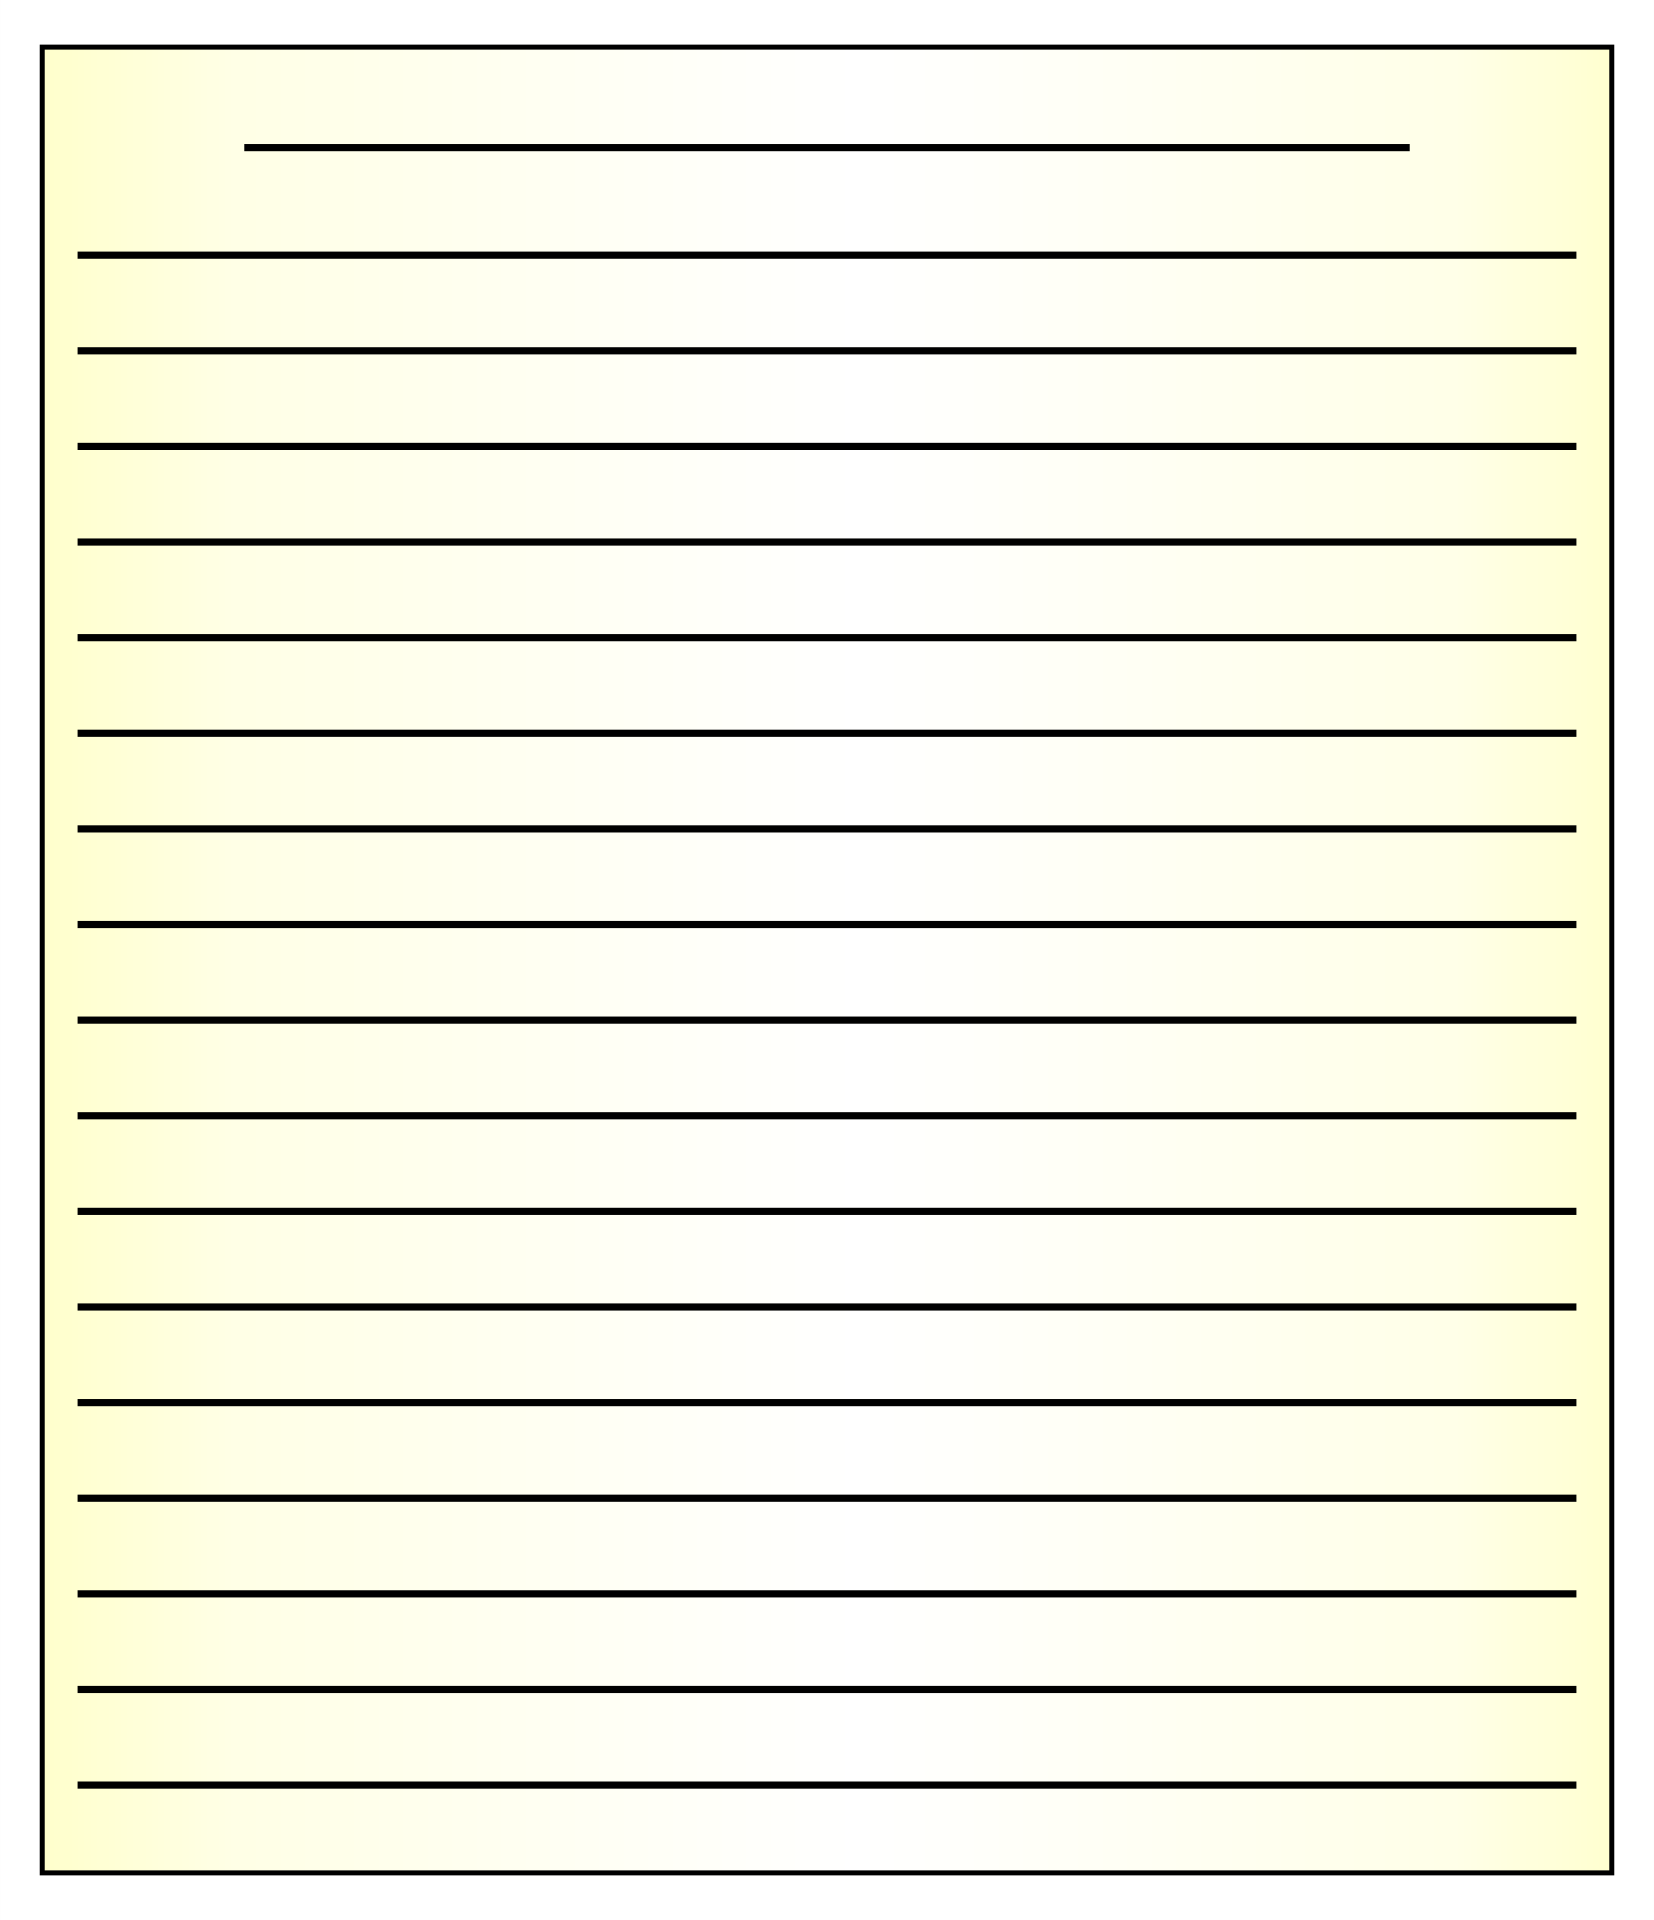 9-best-images-of-standard-printable-lined-writing-paper-lined-writing-paper-with-box